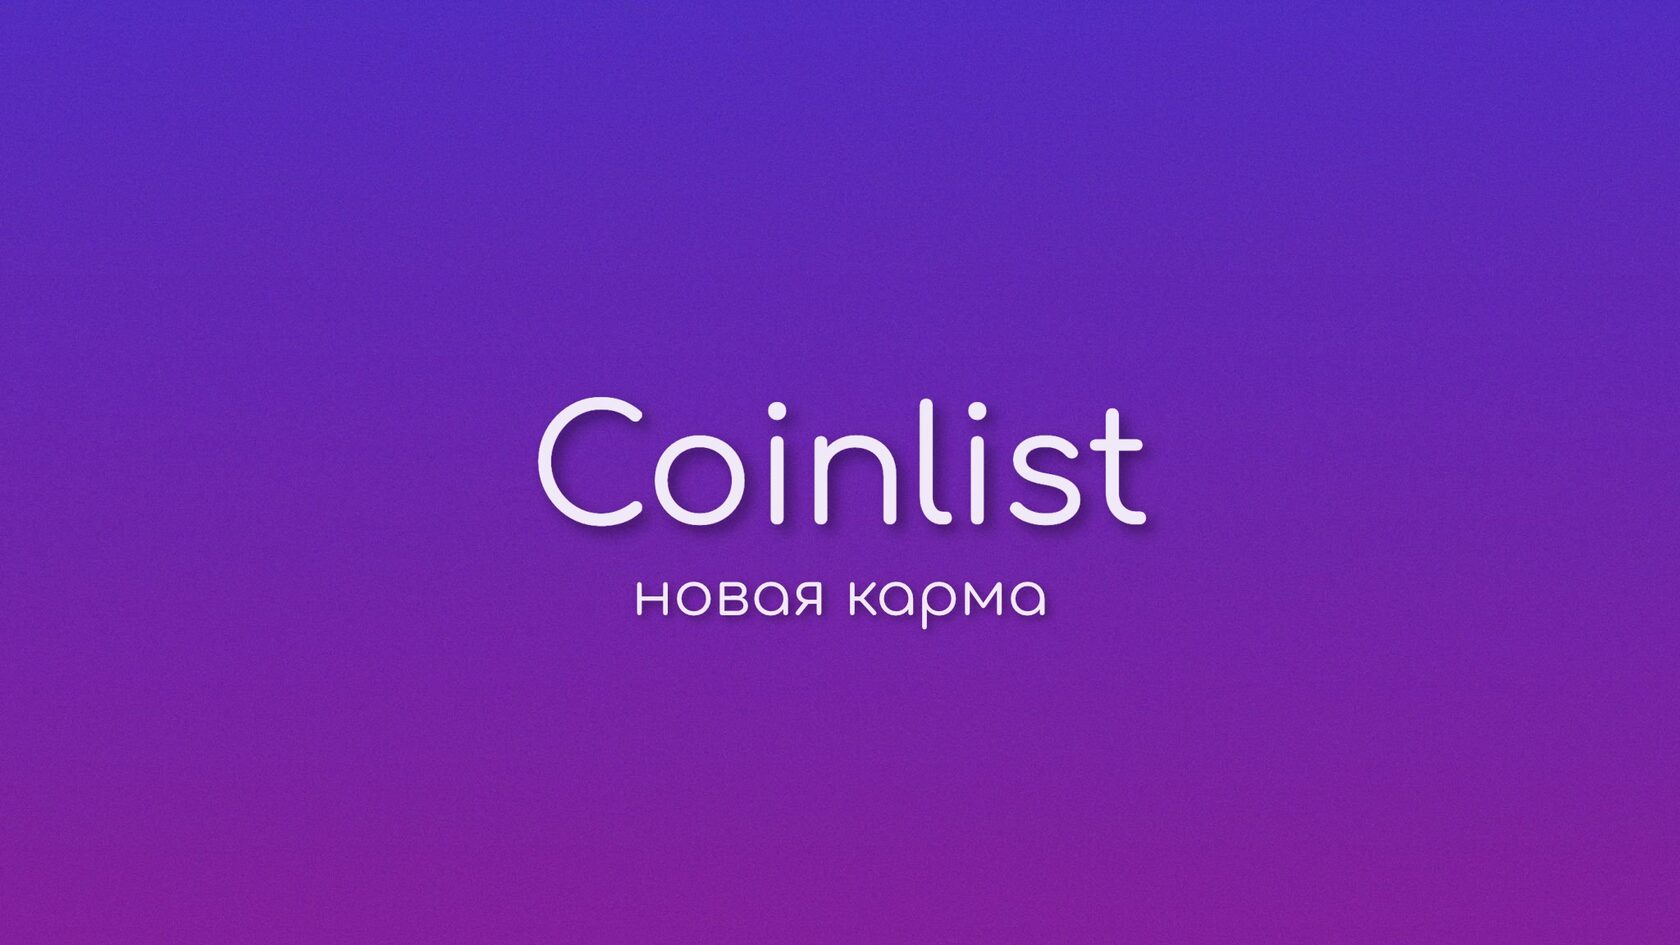 CoinList Karma At 6 Months: A Massive Quality Boost To Crypto Communities